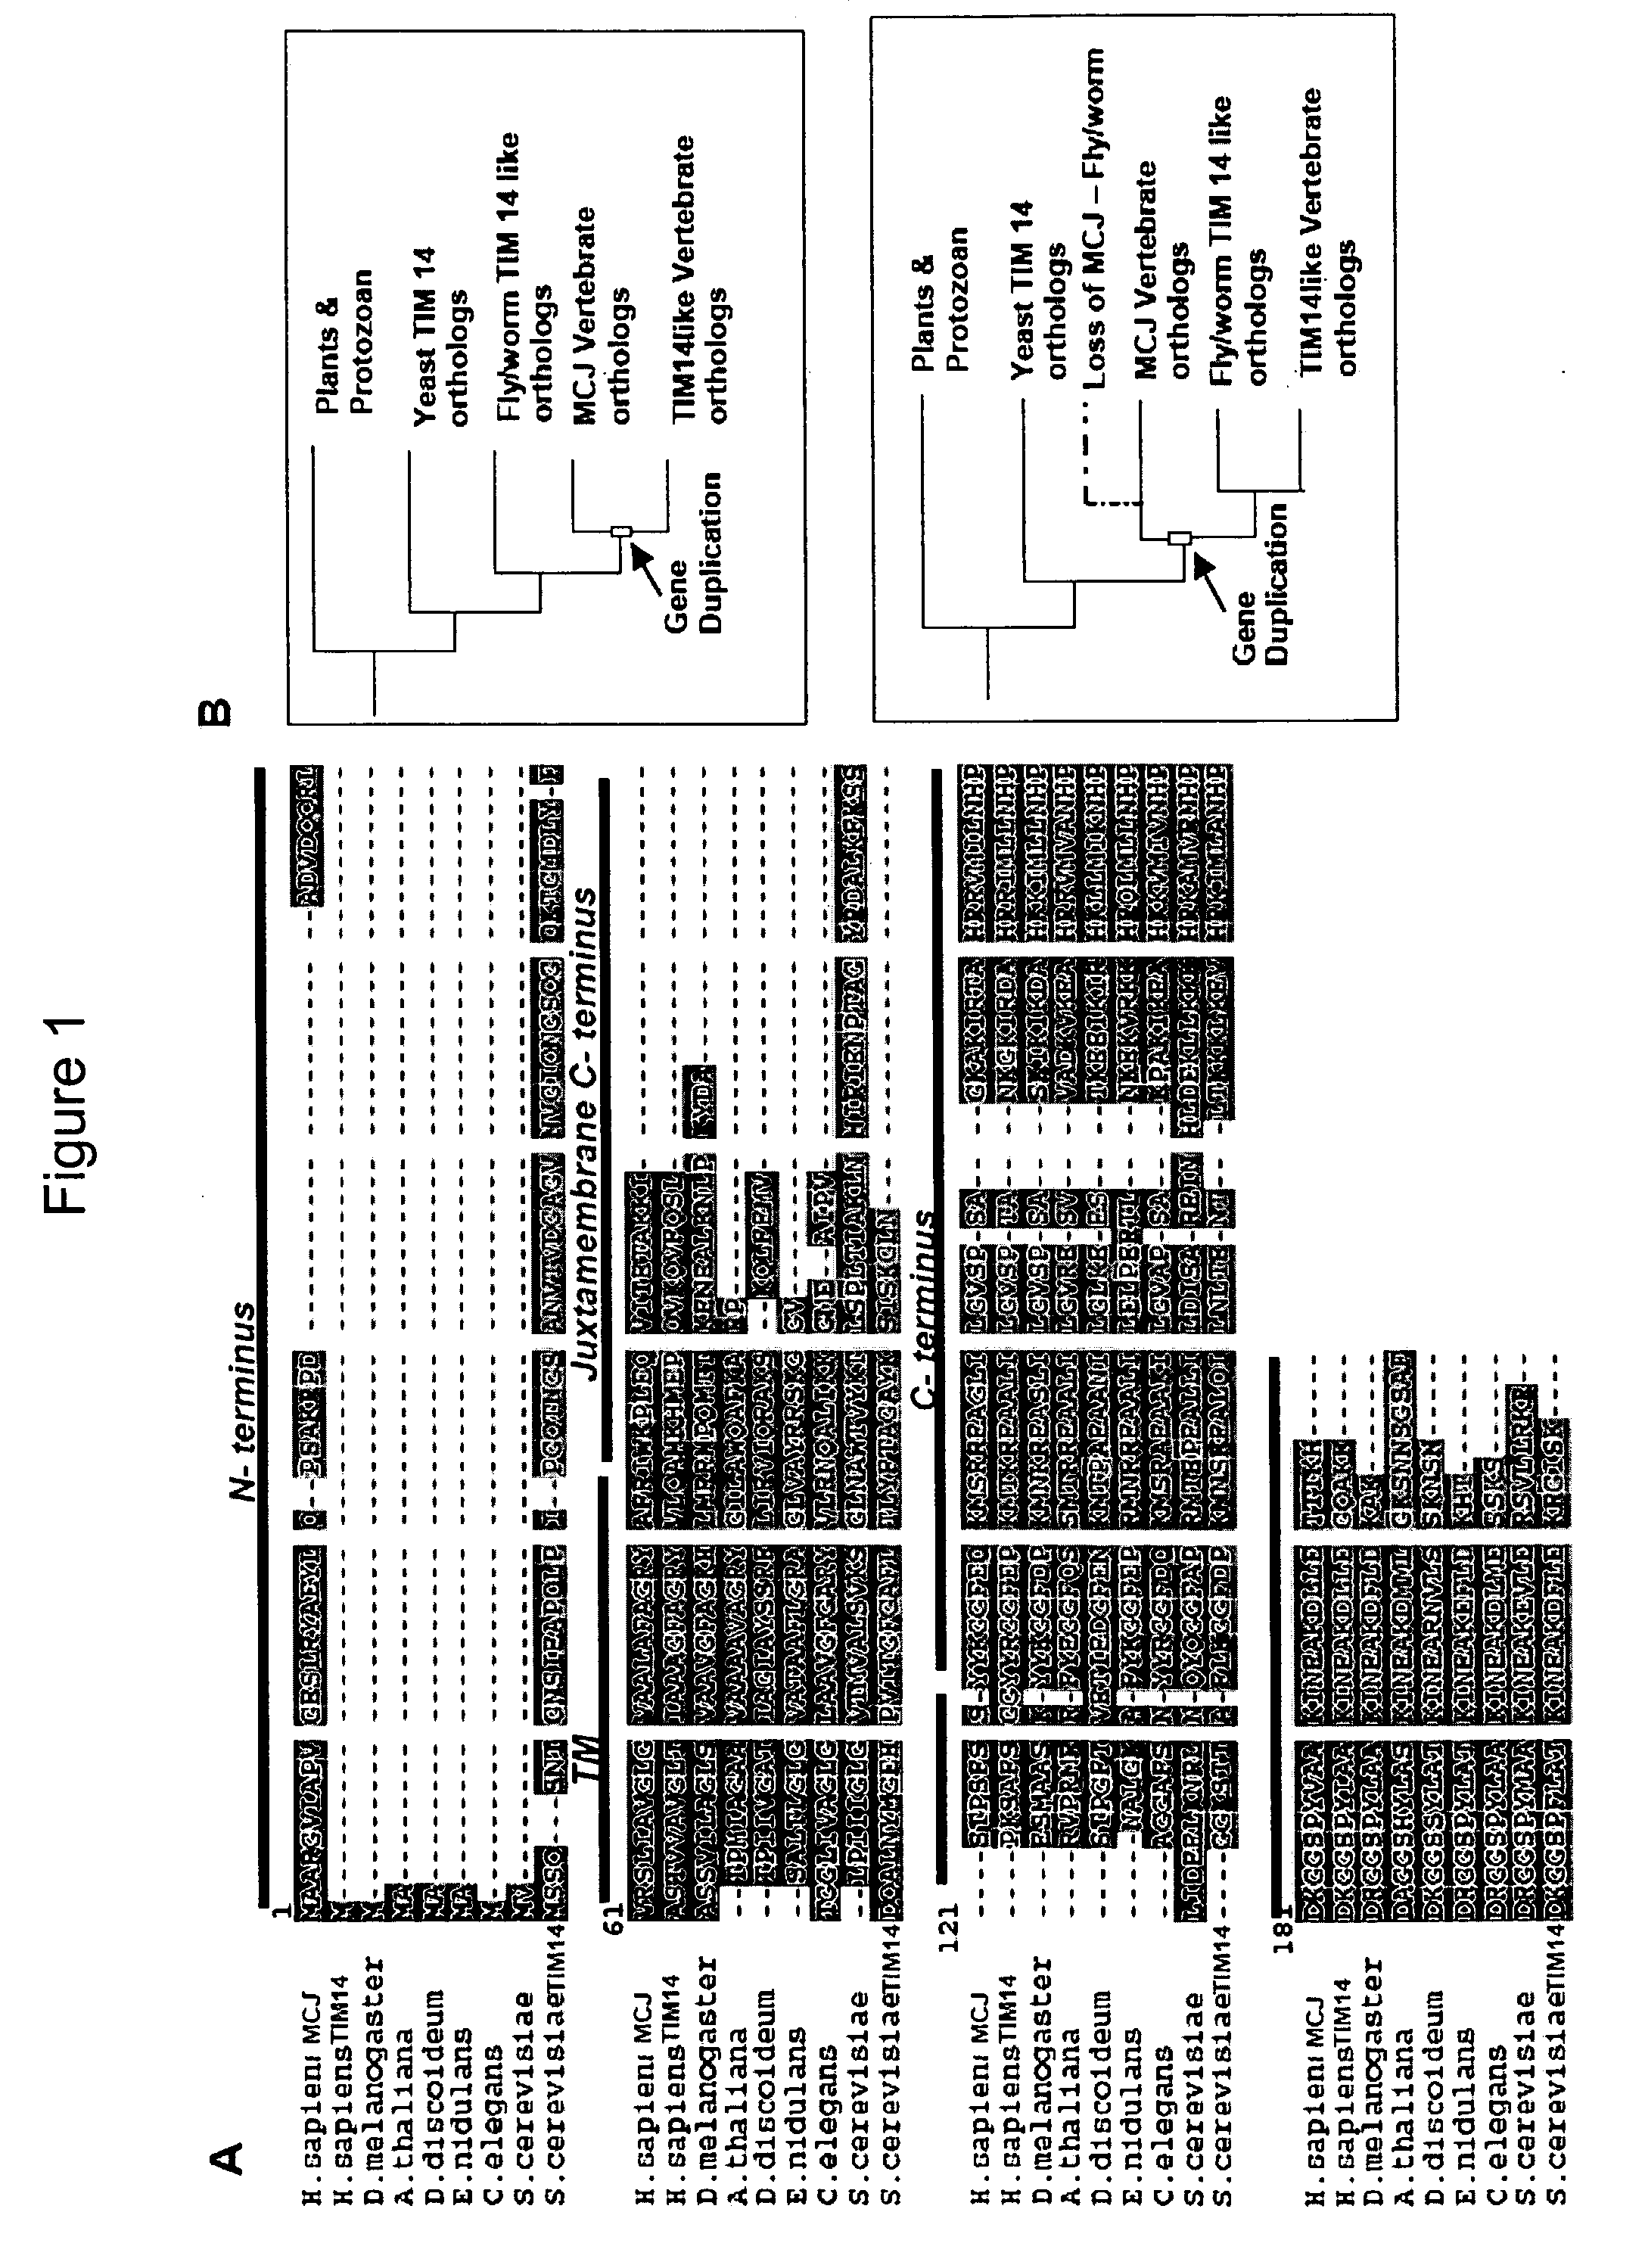 Anti-Methylation-Controlled J Protein Antibodies and Uses Thereof